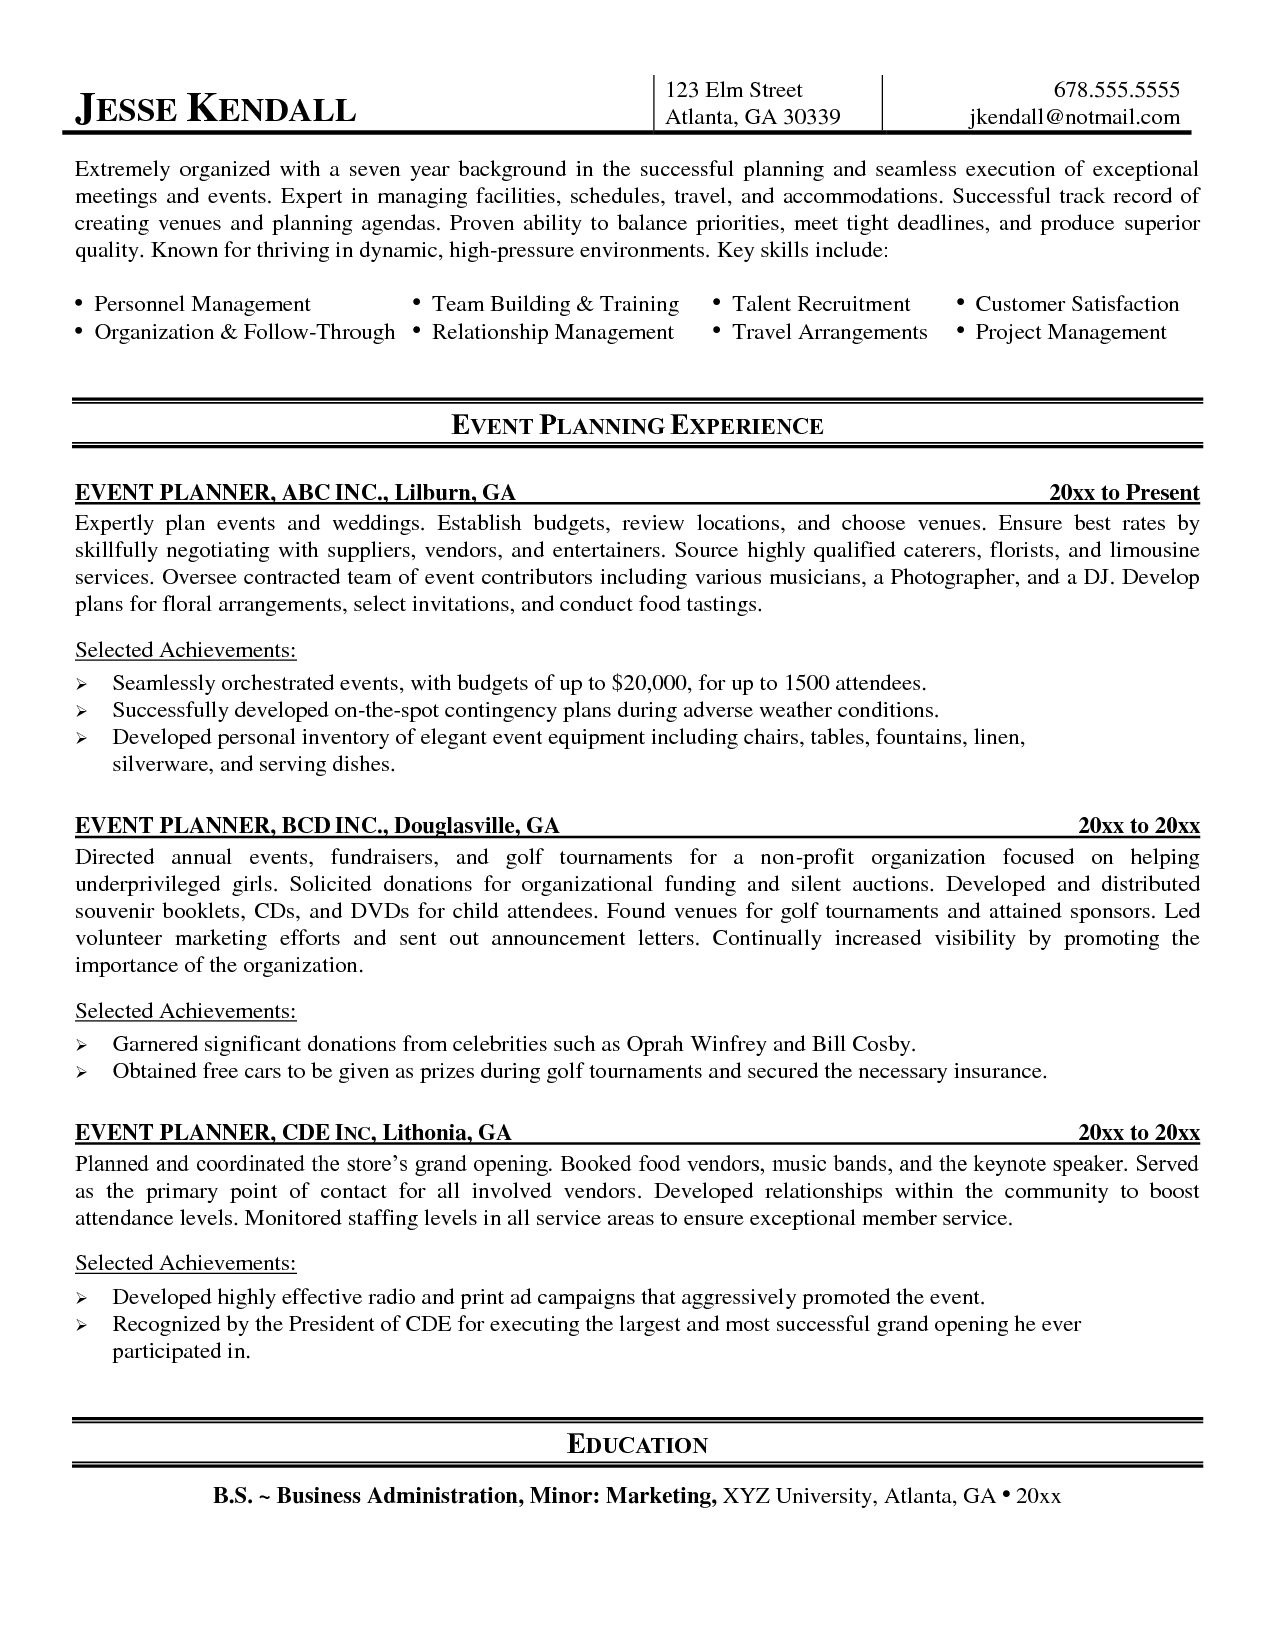 Event Planner Resume Event Planner Resume Now Planning Examples Party Planners Process Manager Cover Letter Writing Template Corporate Events Vancouver Organization Wedding Job Description Coordinato event planner resume|wikiresume.com